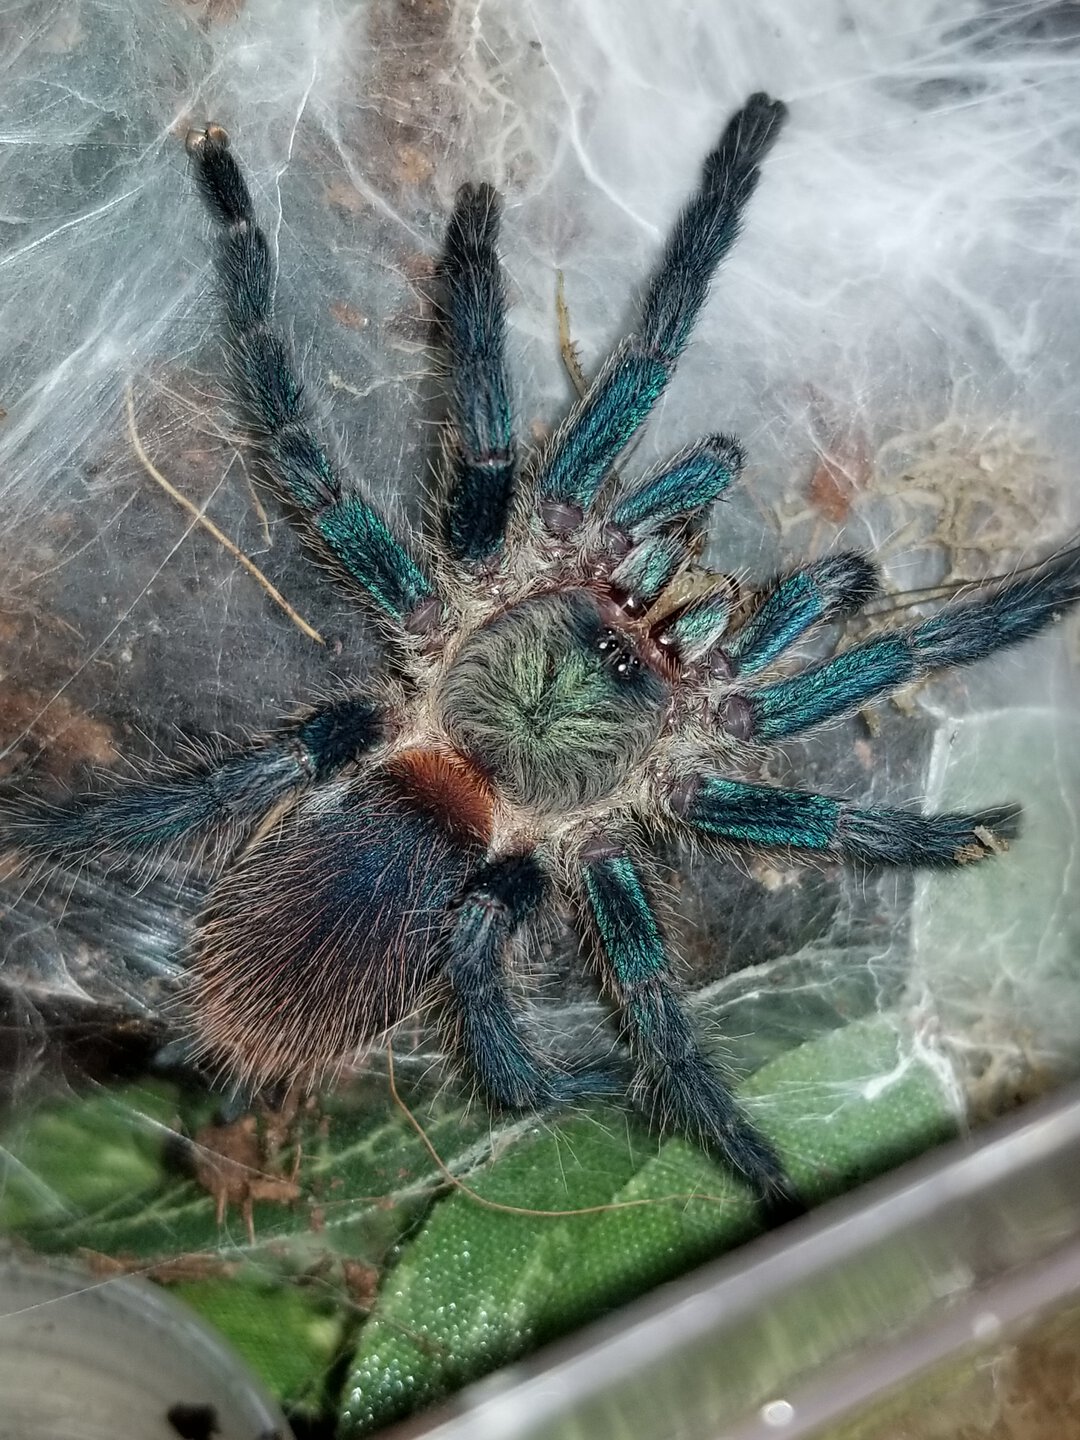 Feeding time for my D. diamantinensis